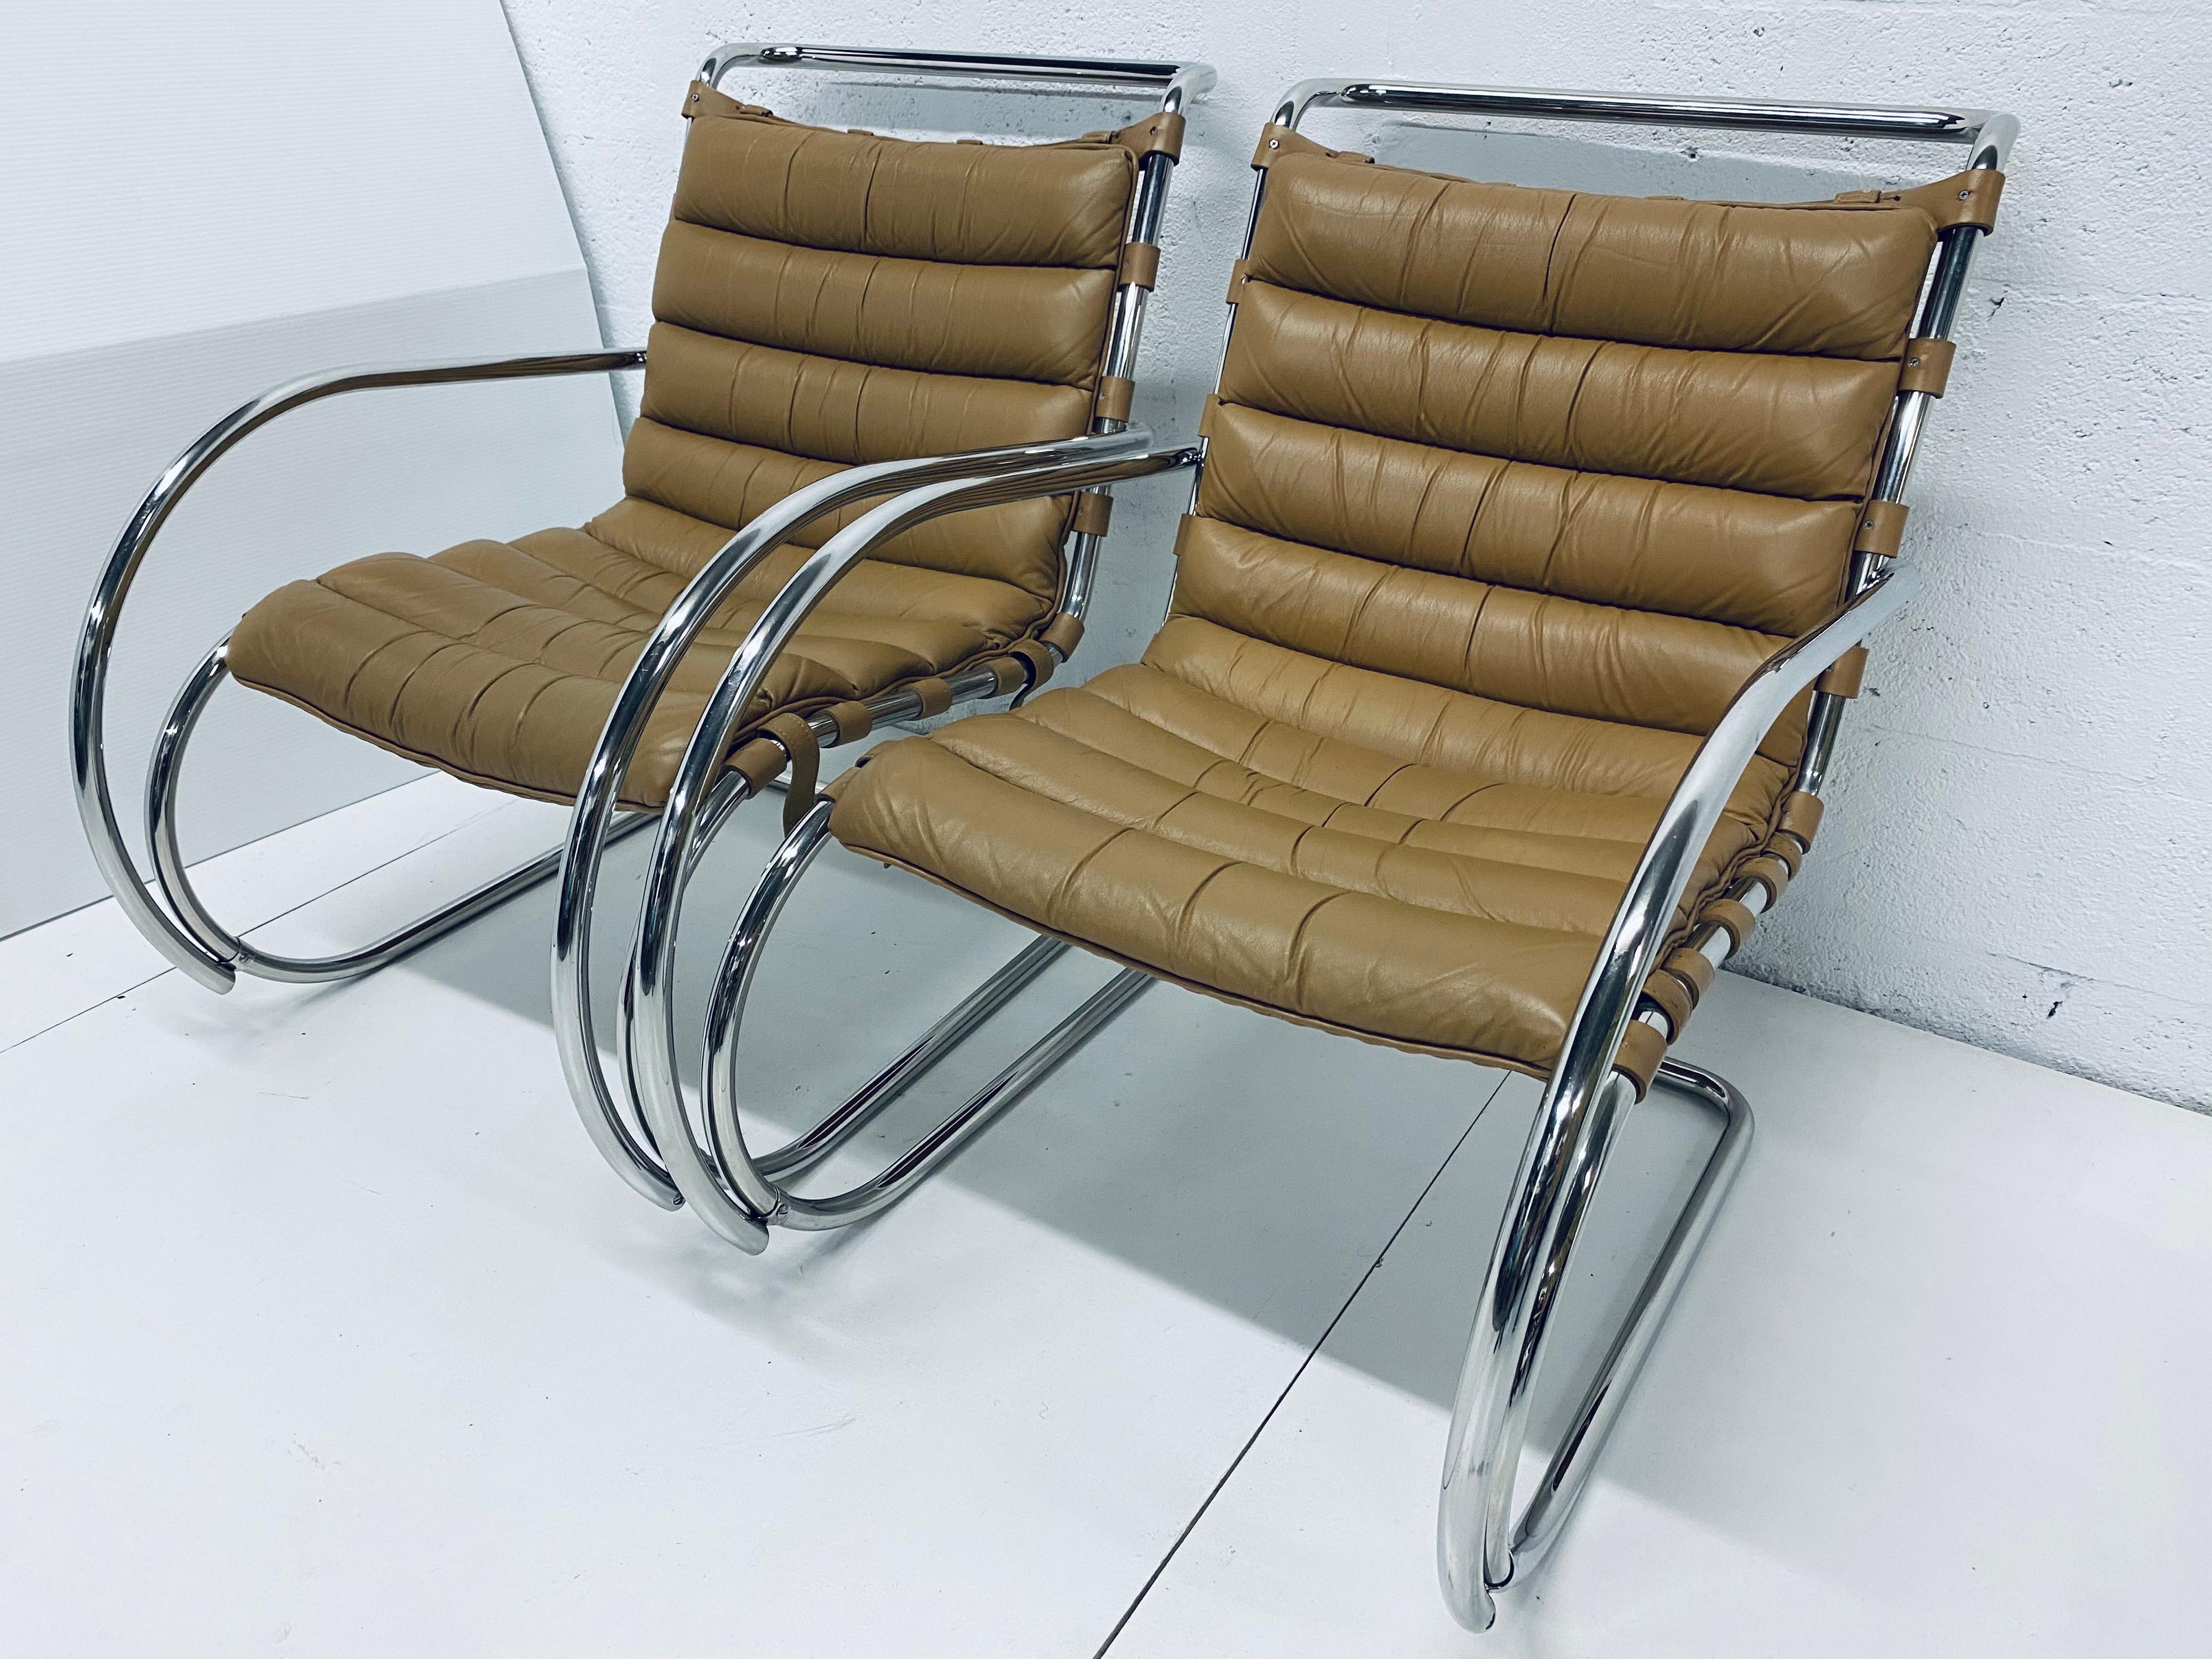 Pair of authentic MR lounge chairs with tan channel tufted leather over leather support straps and a tubular chrome frame designed by Ludwig Mies van der Rohe and produced by Knoll International, 1970s.